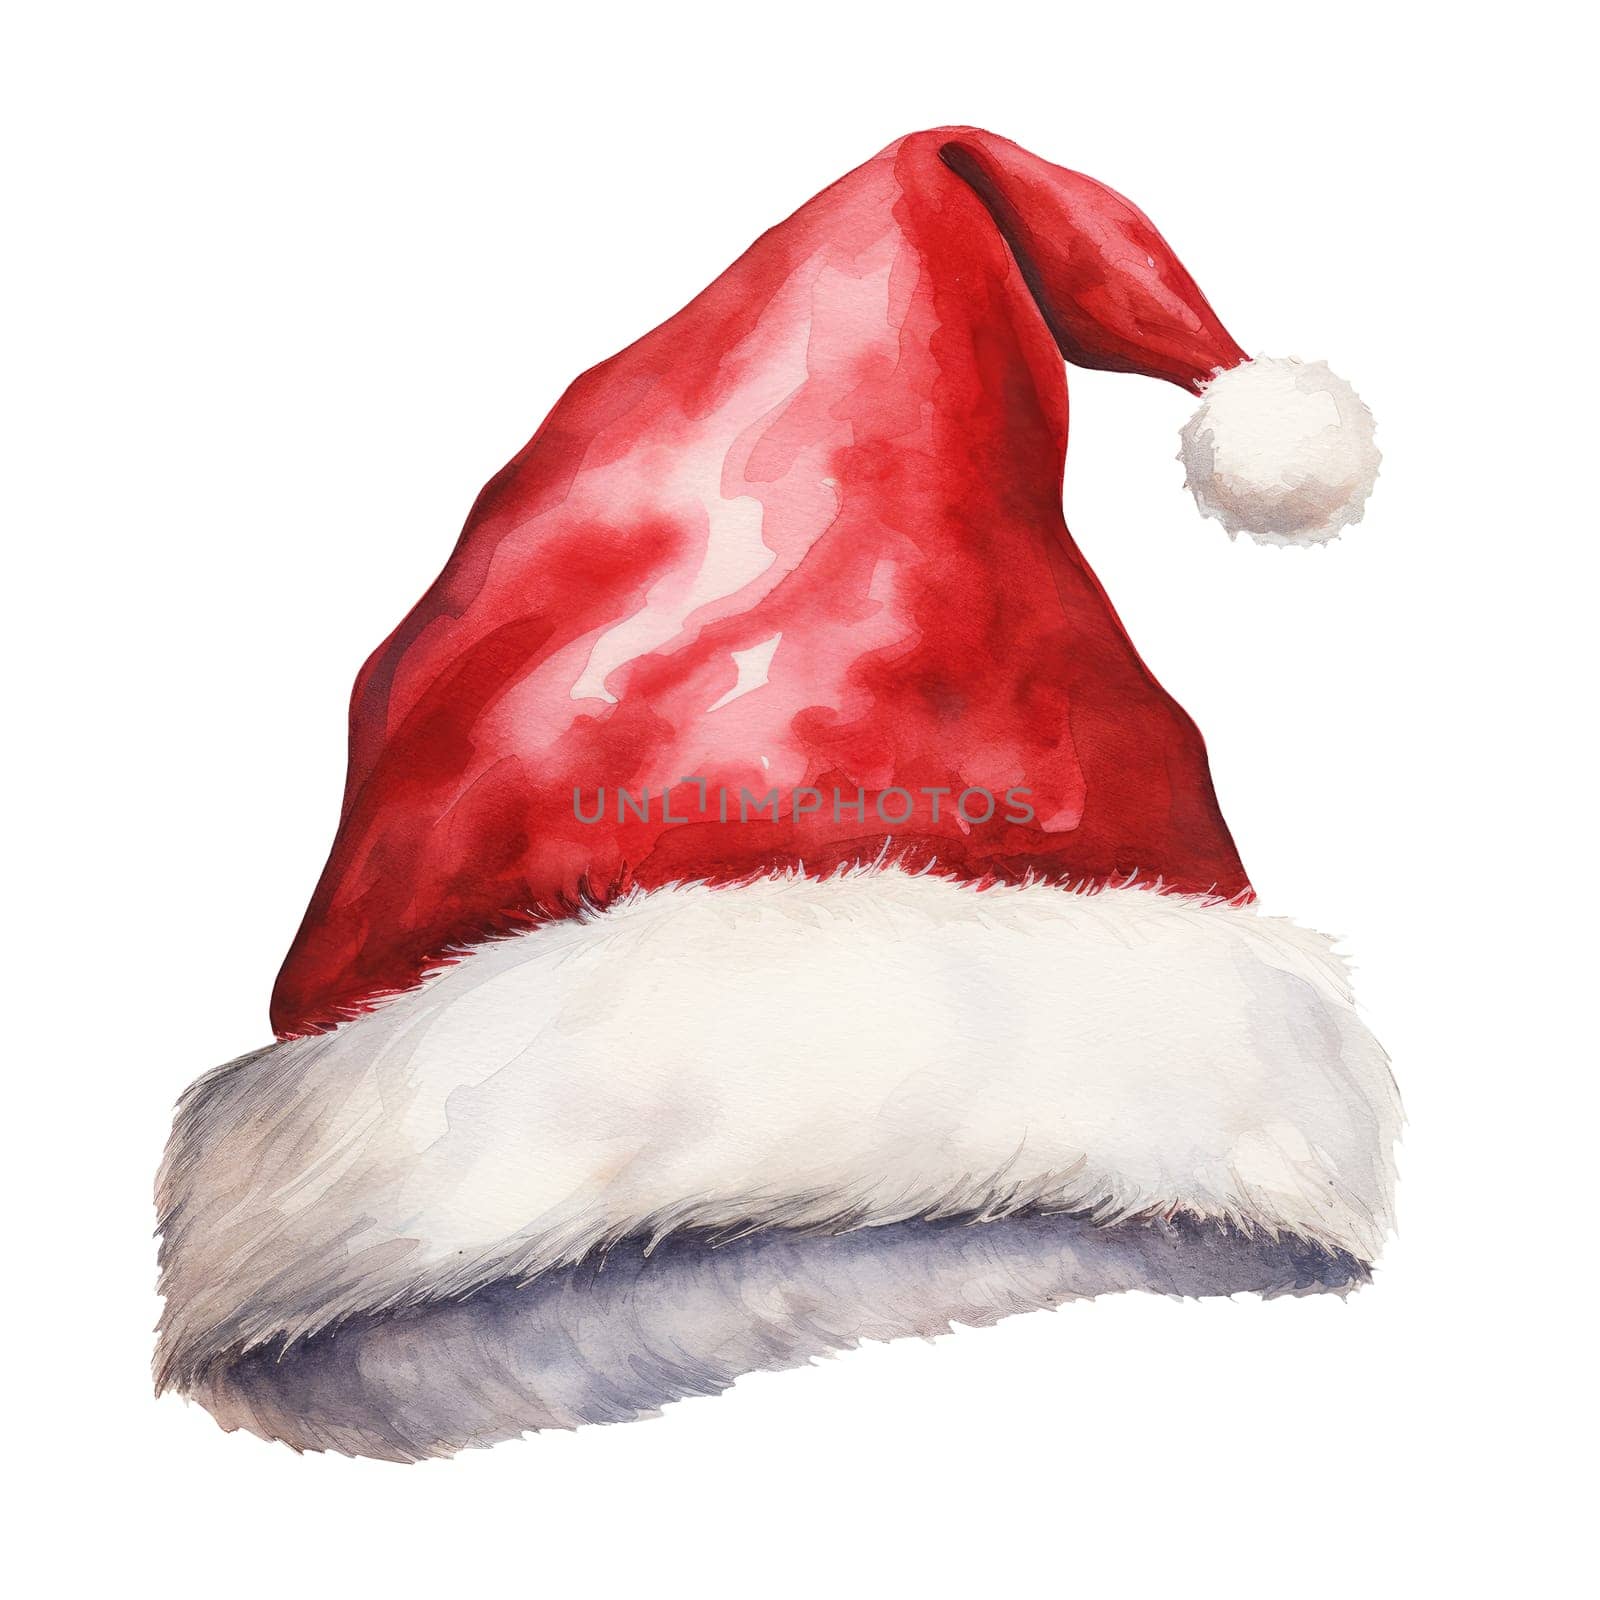 Santa Claus red hat. Watercolor illustration, isolated on white by natali_brill